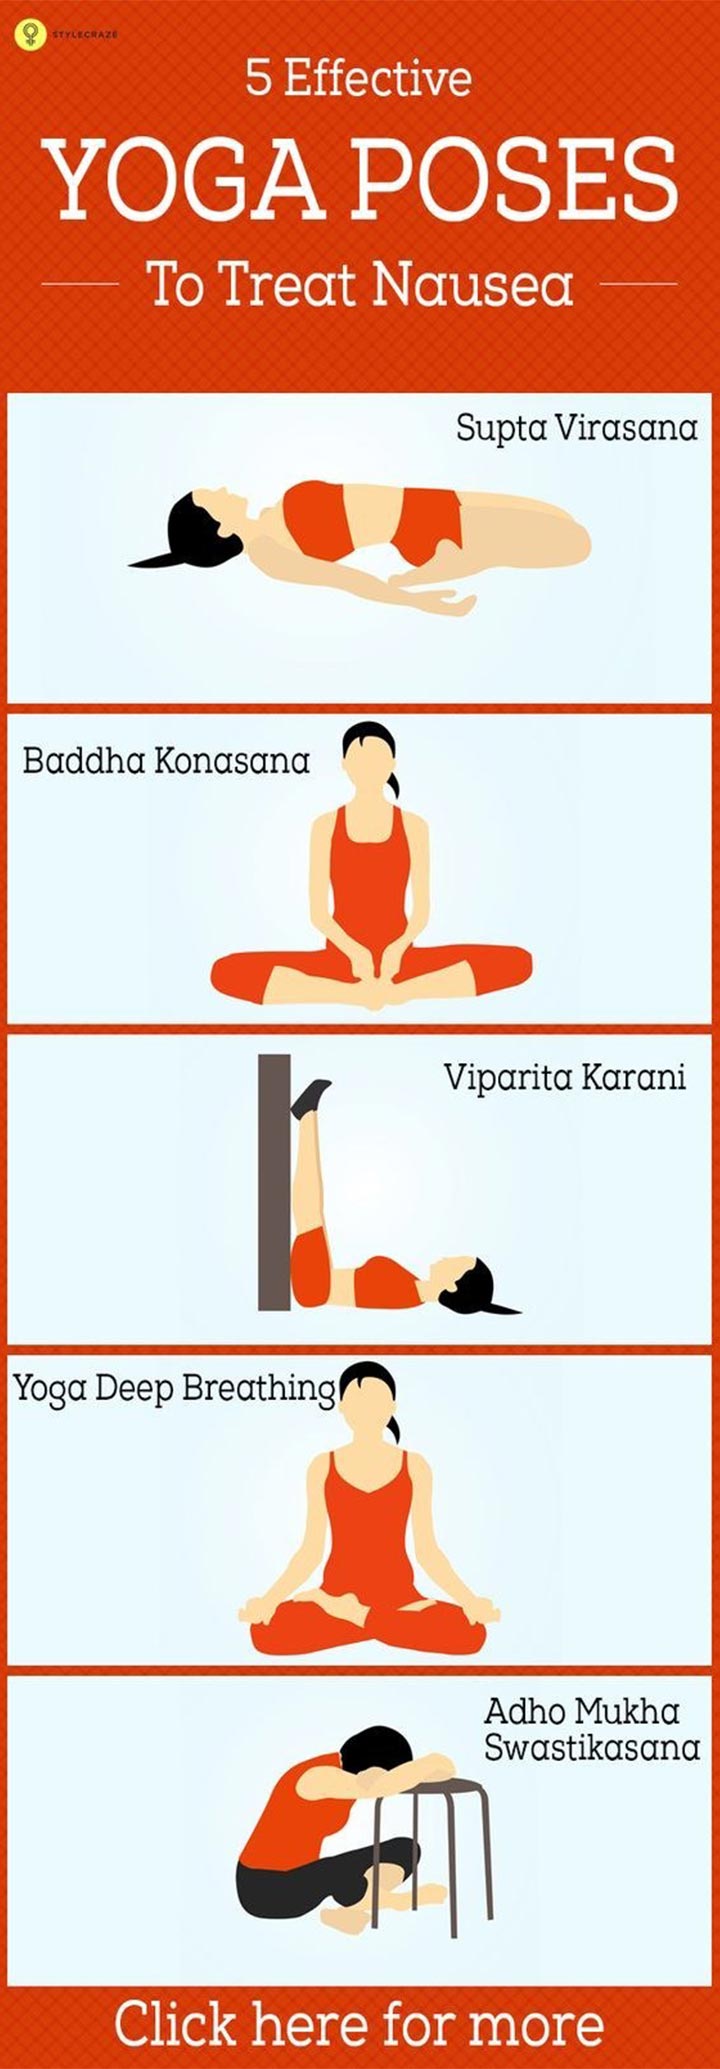 try these yoga poses and see the difference.